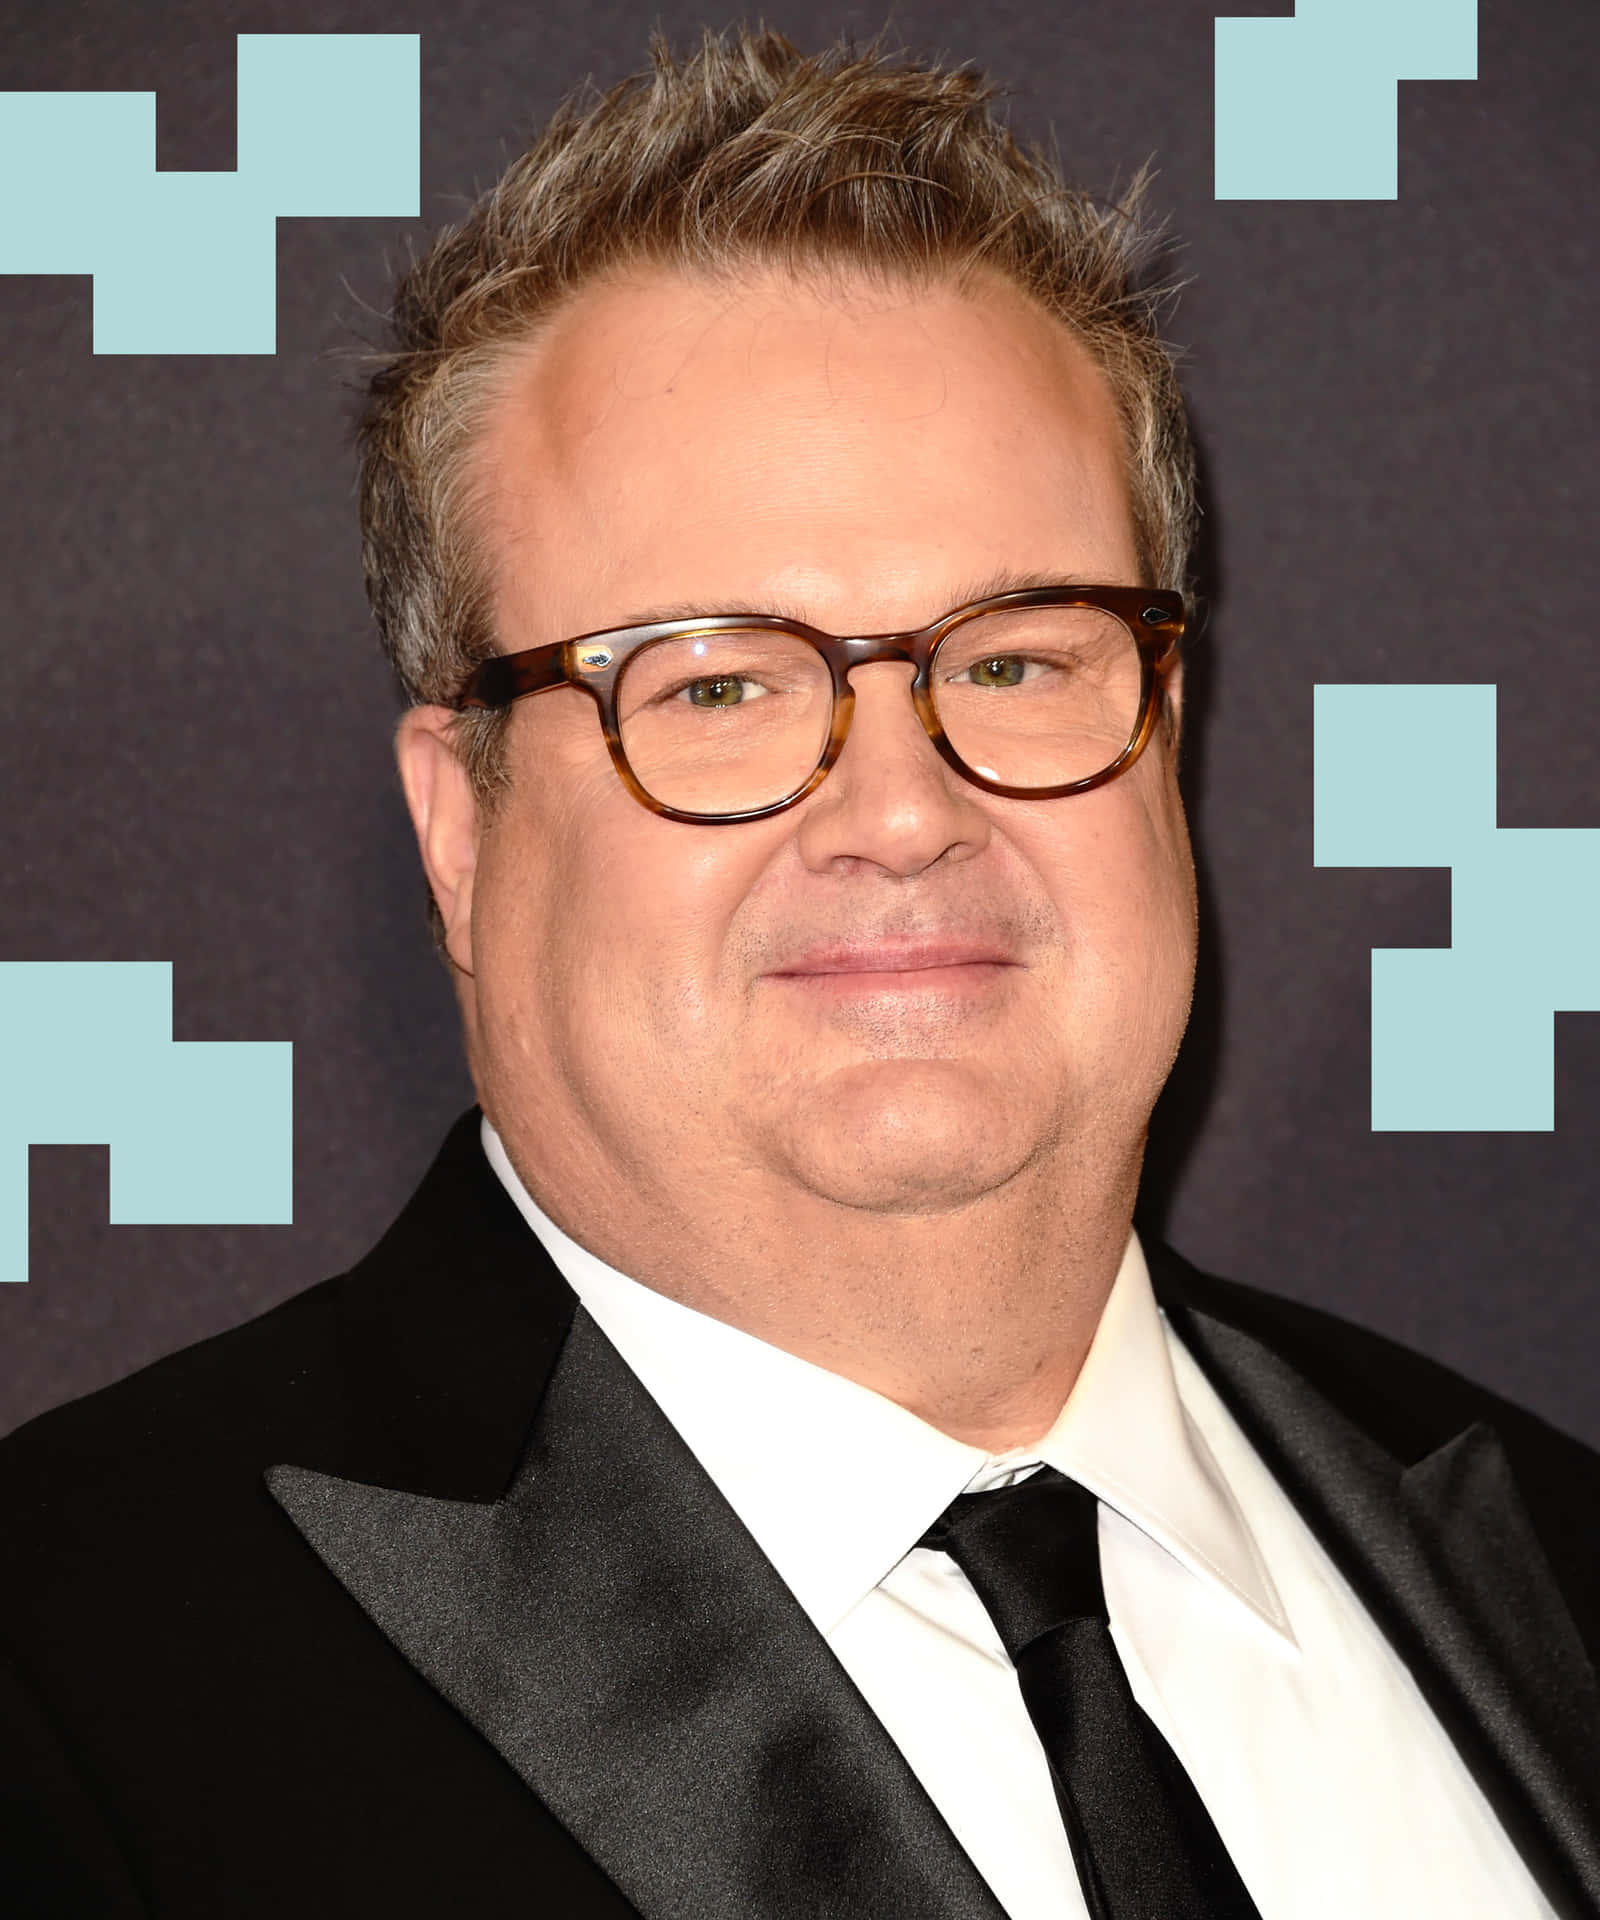 Ericstonestreet Is An American Actor Known For His Role As Cameron Tucker On The Television Series Modern Family. Fondo de pantalla